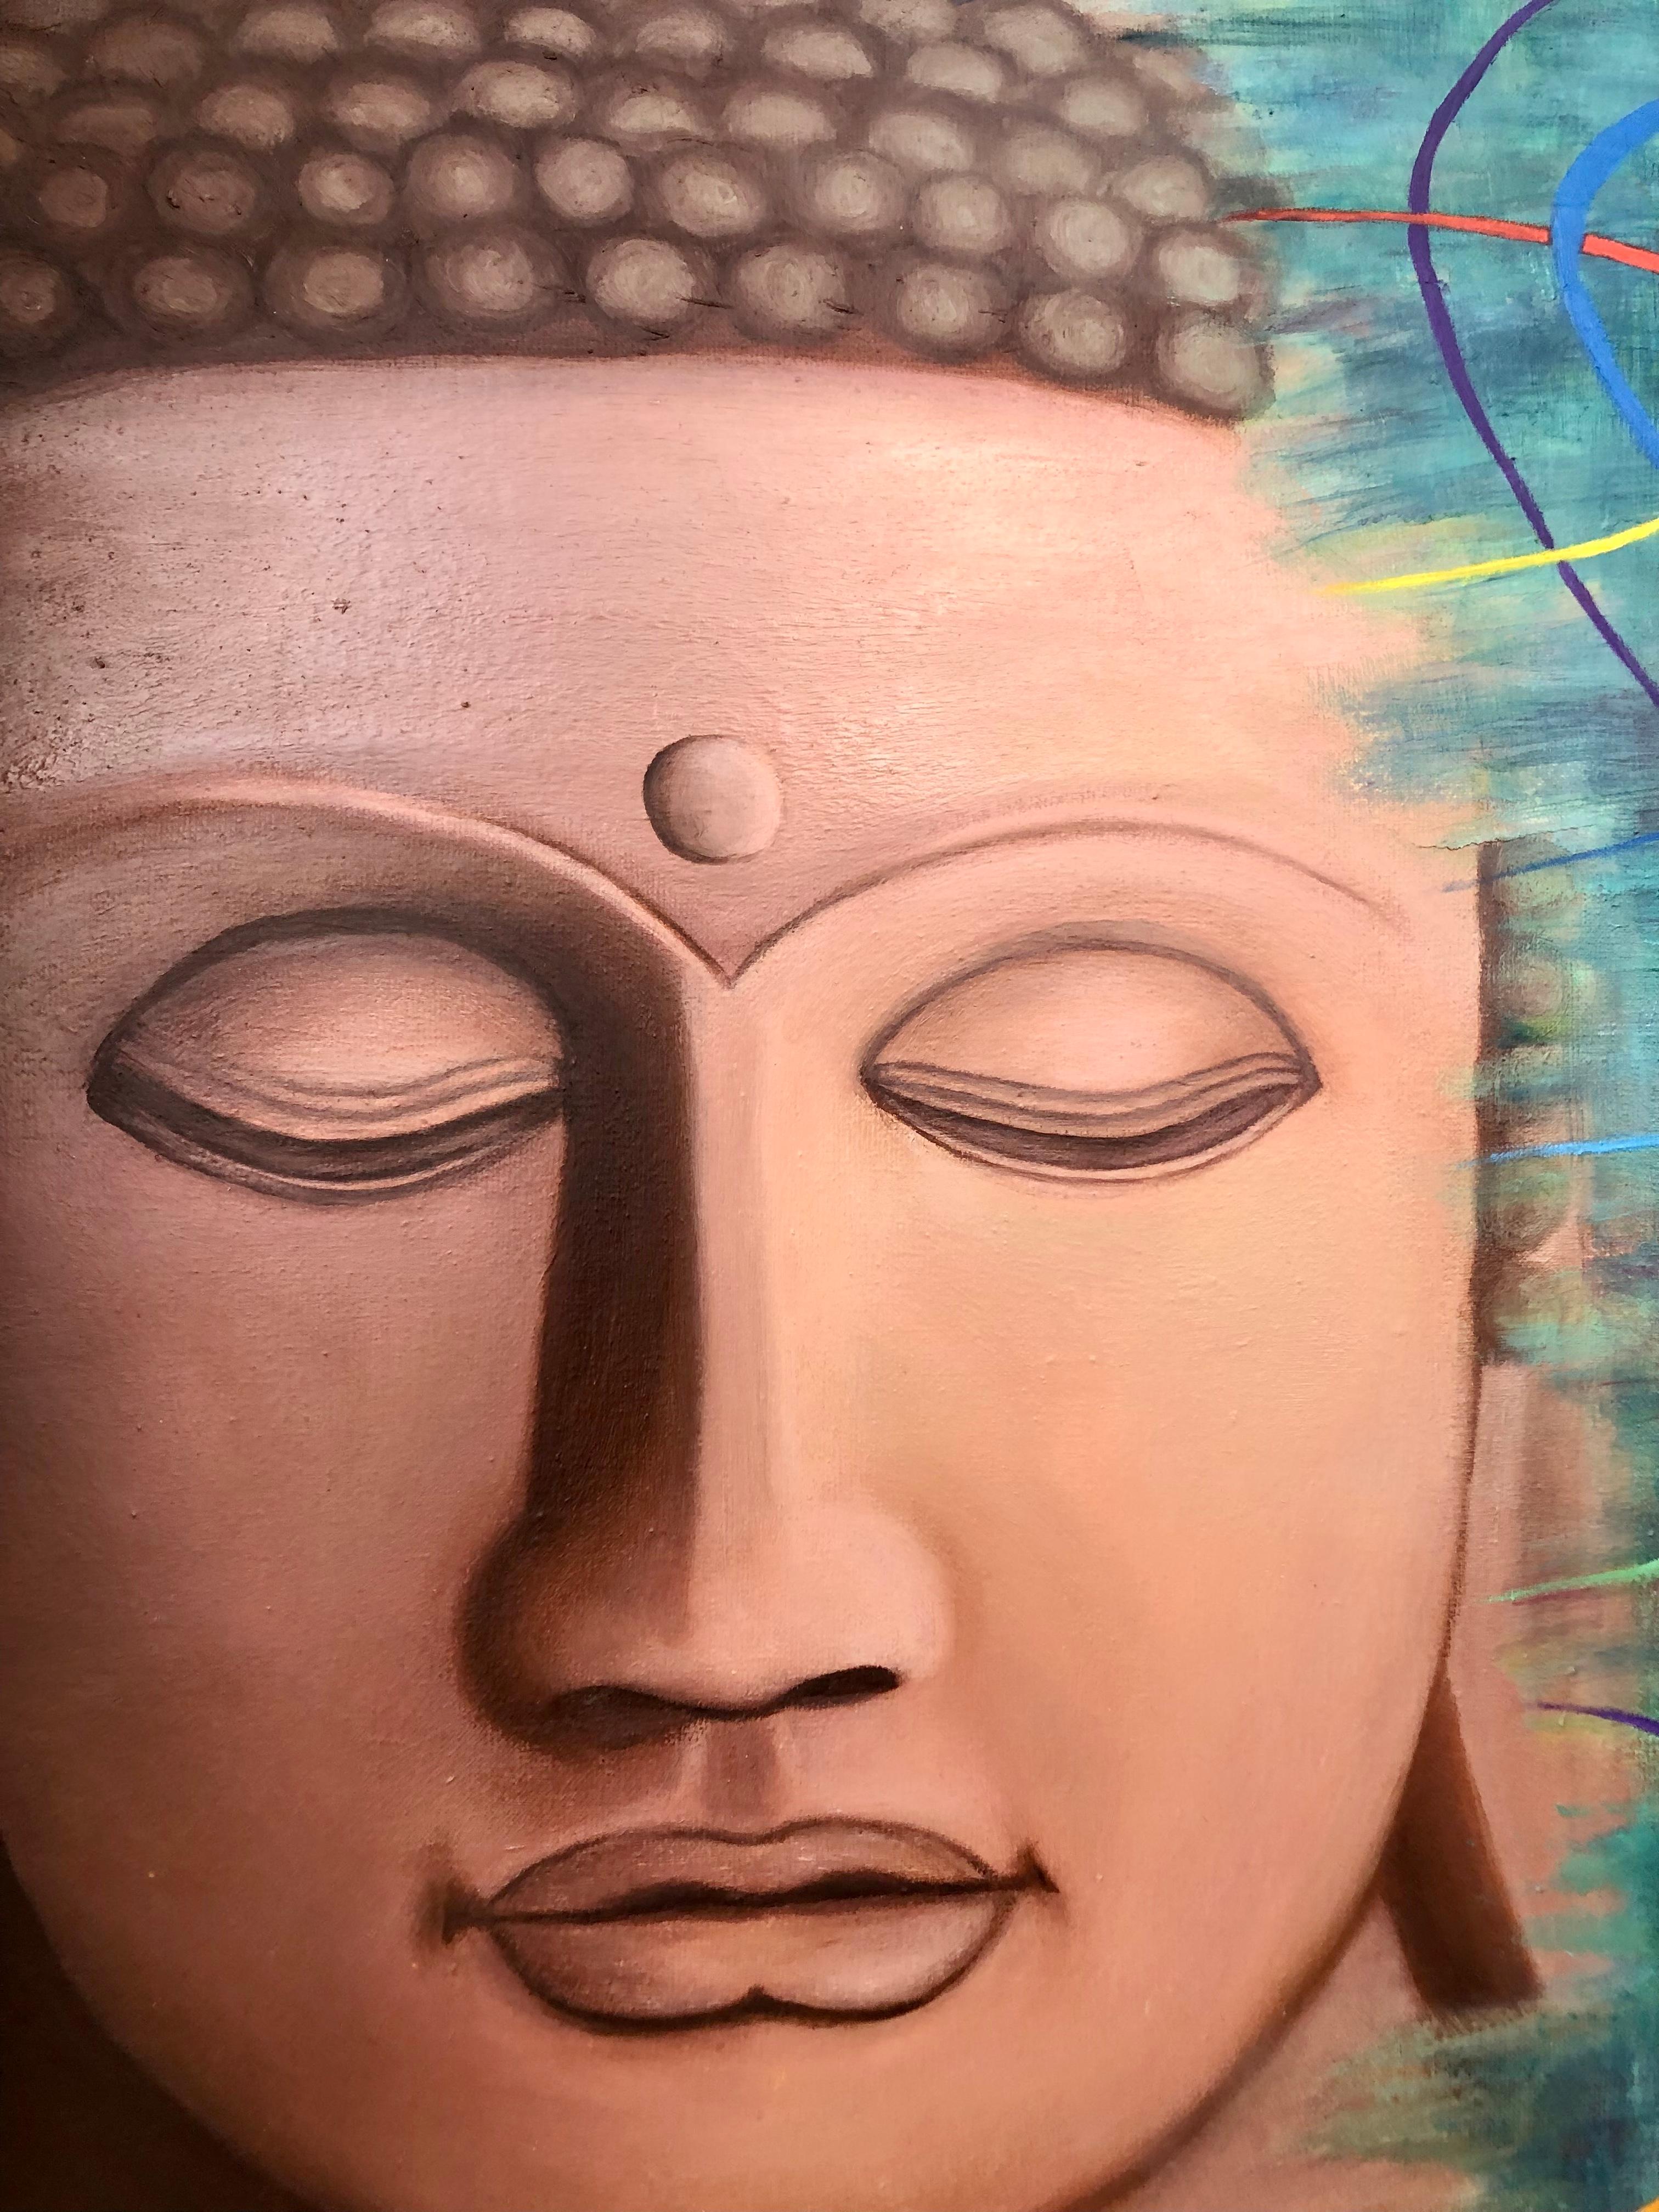 The main thing in life is to save your own inner peace, on the left Buddha - he is calm and peaceful, on the right is our everyday’s life with all troubles and obstacles, and no matter what happens Buddha remains calm. The colourful lines respond